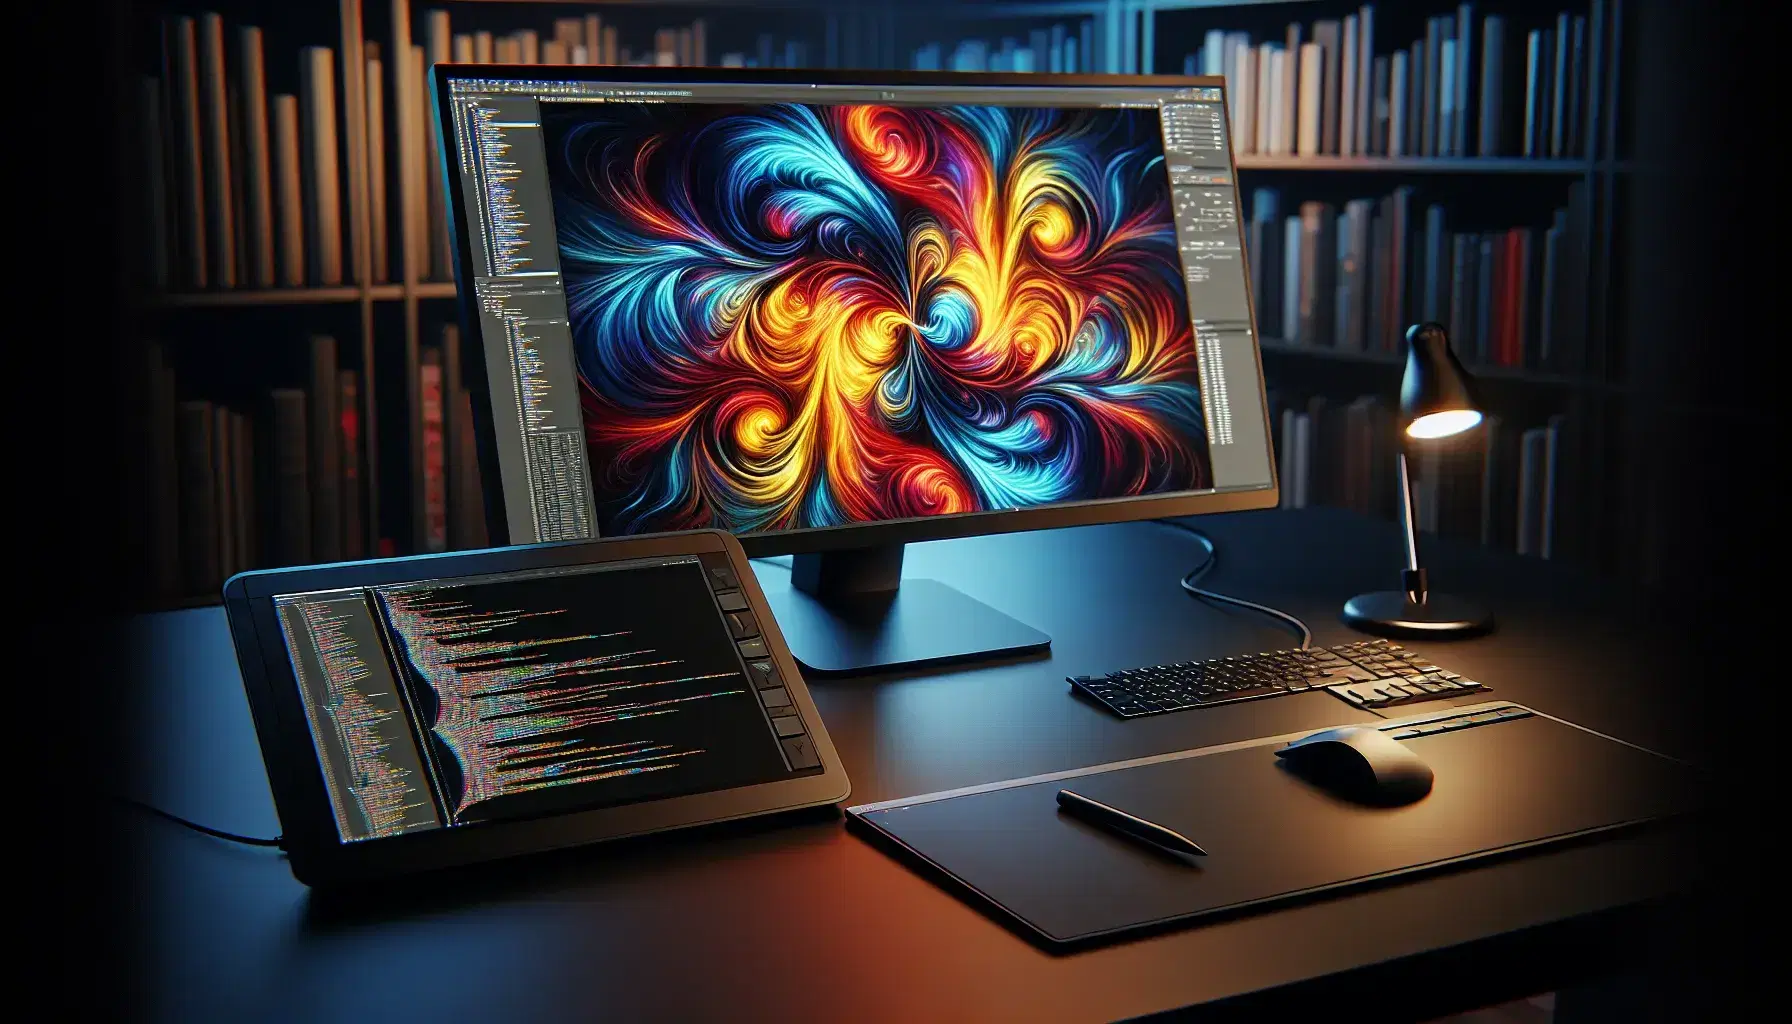 Modern computer station with dual monitors, graphics tablet and stylus, abstract digital art on the left monitor and code editor on the right.